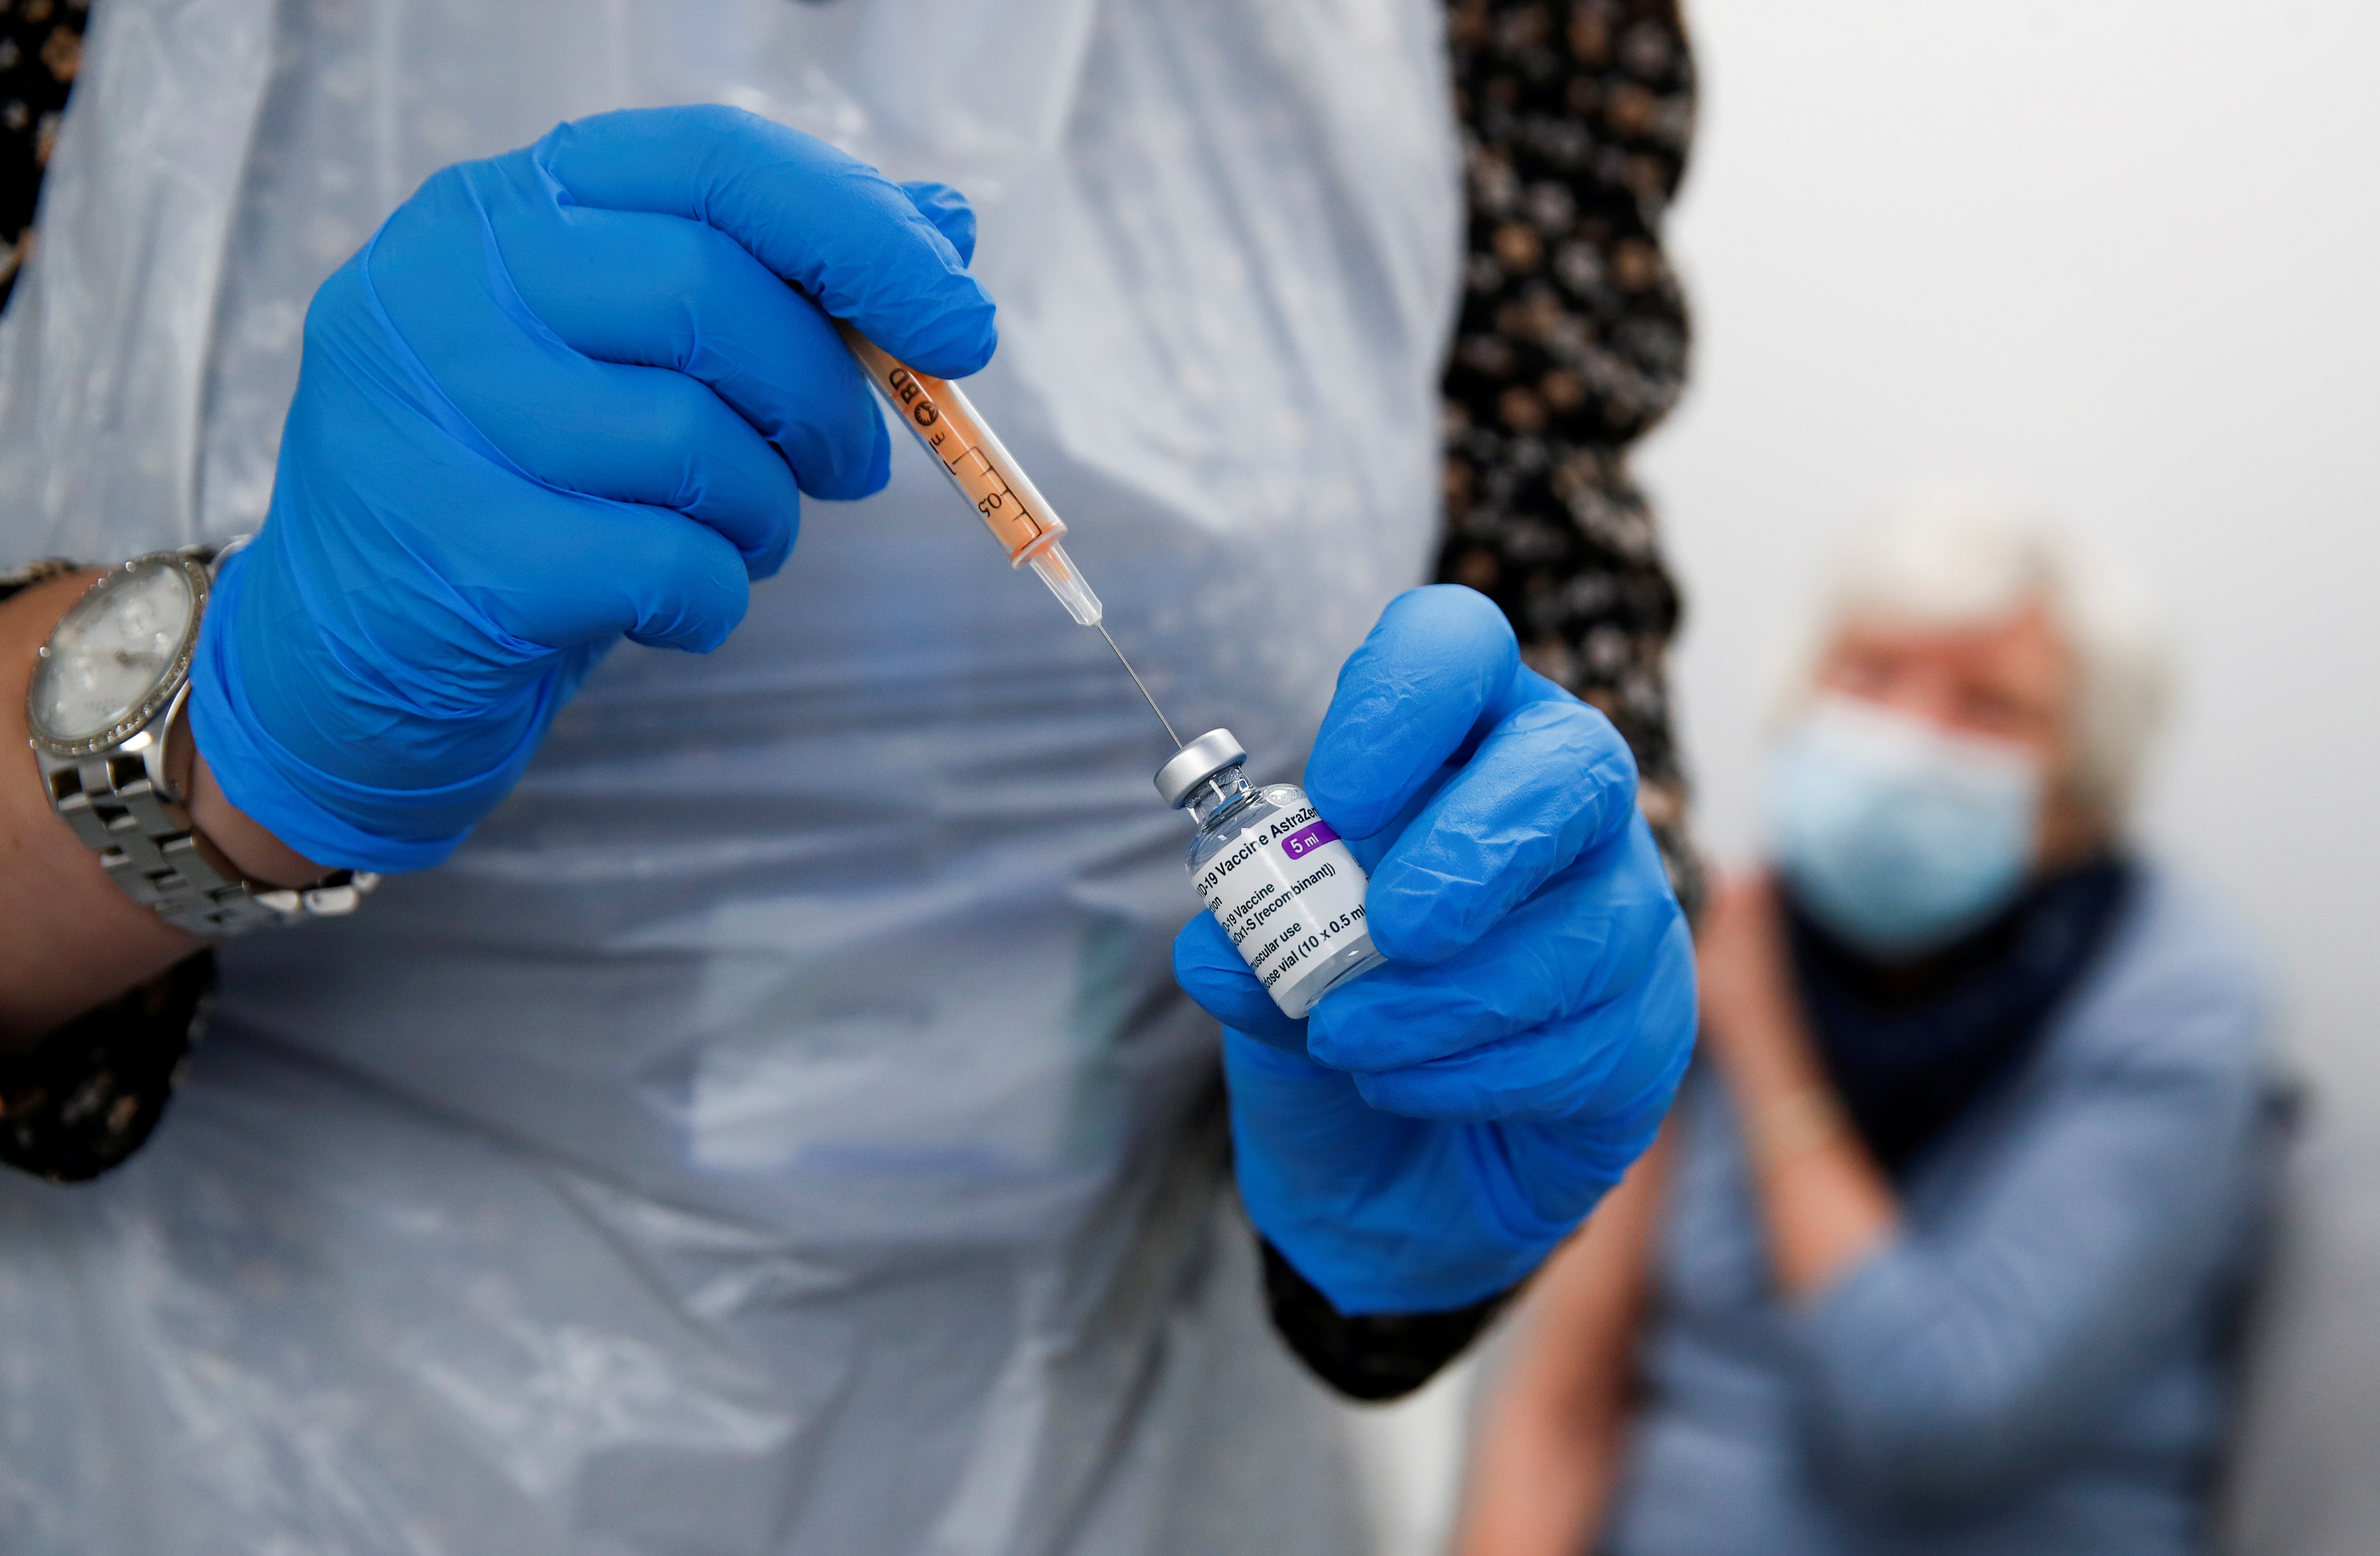 A health worker fills a syringe with a dose of the Oxford/AstraZeneca COVID-19 vaccine at the Appleton Village Pharmacy, amid the coronavirus disease (COVID-19) outbreak, in Widnes, Britain January 14, 2021. REUTERS/Jason Cairnduff